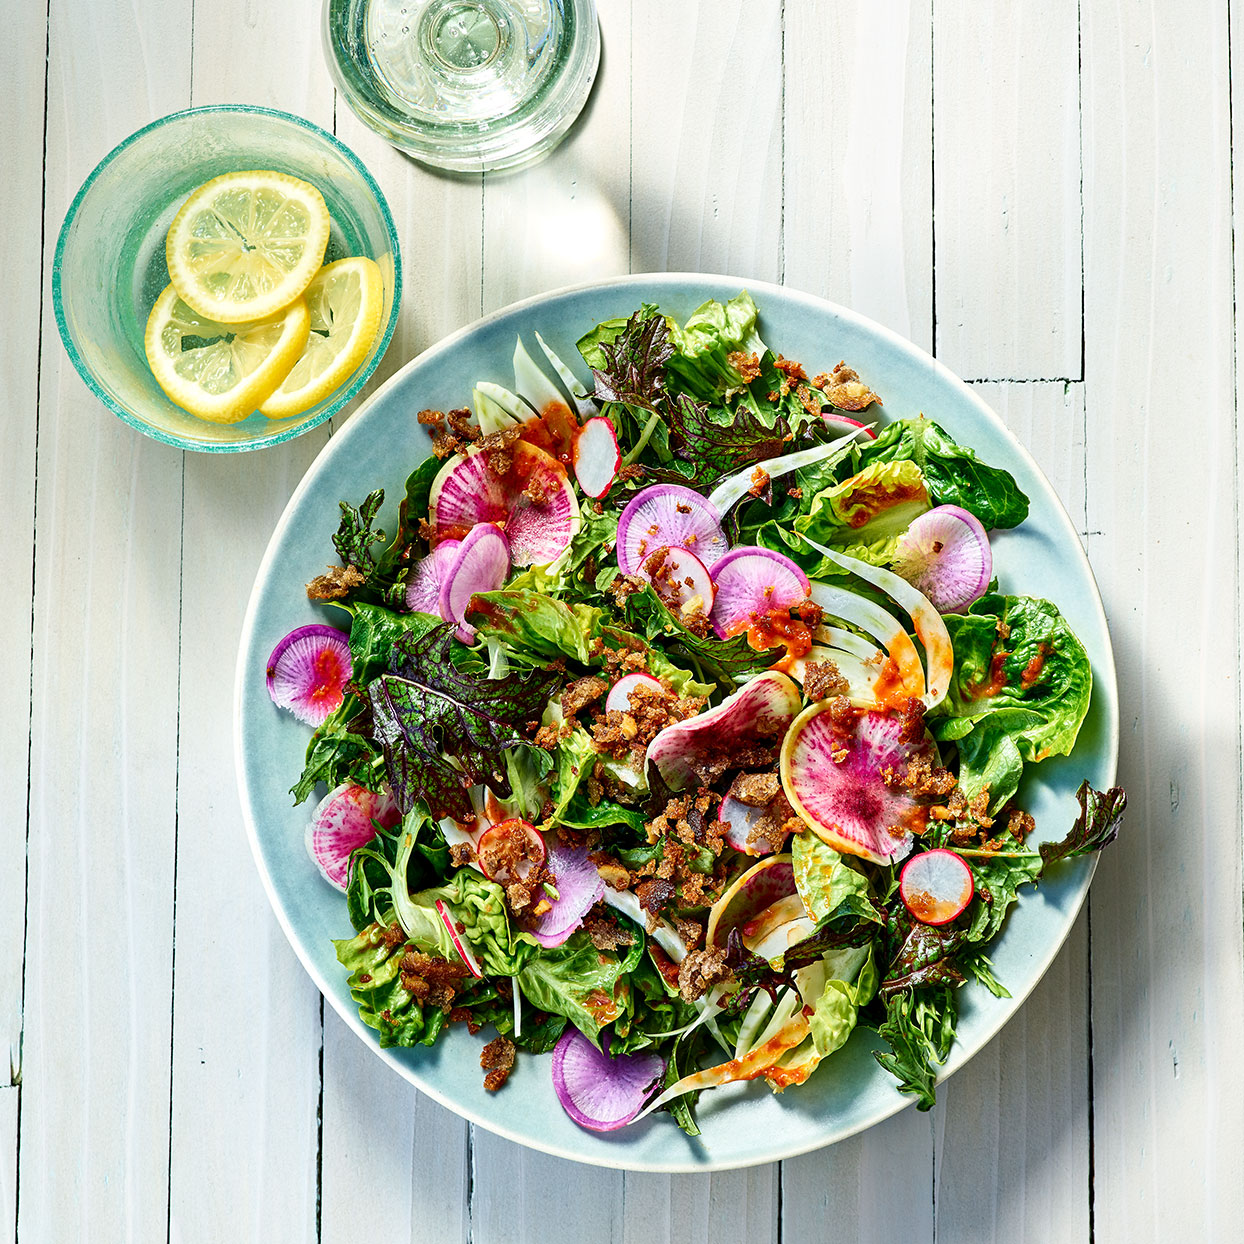 <p>Using a variety of greens gives this simple summer salad an interesting mix of textures. The anchovy in the breadcrumbs and sun-dried tomatoes in the vinaigrette are subtle, but key to adding umami.</p>
                          